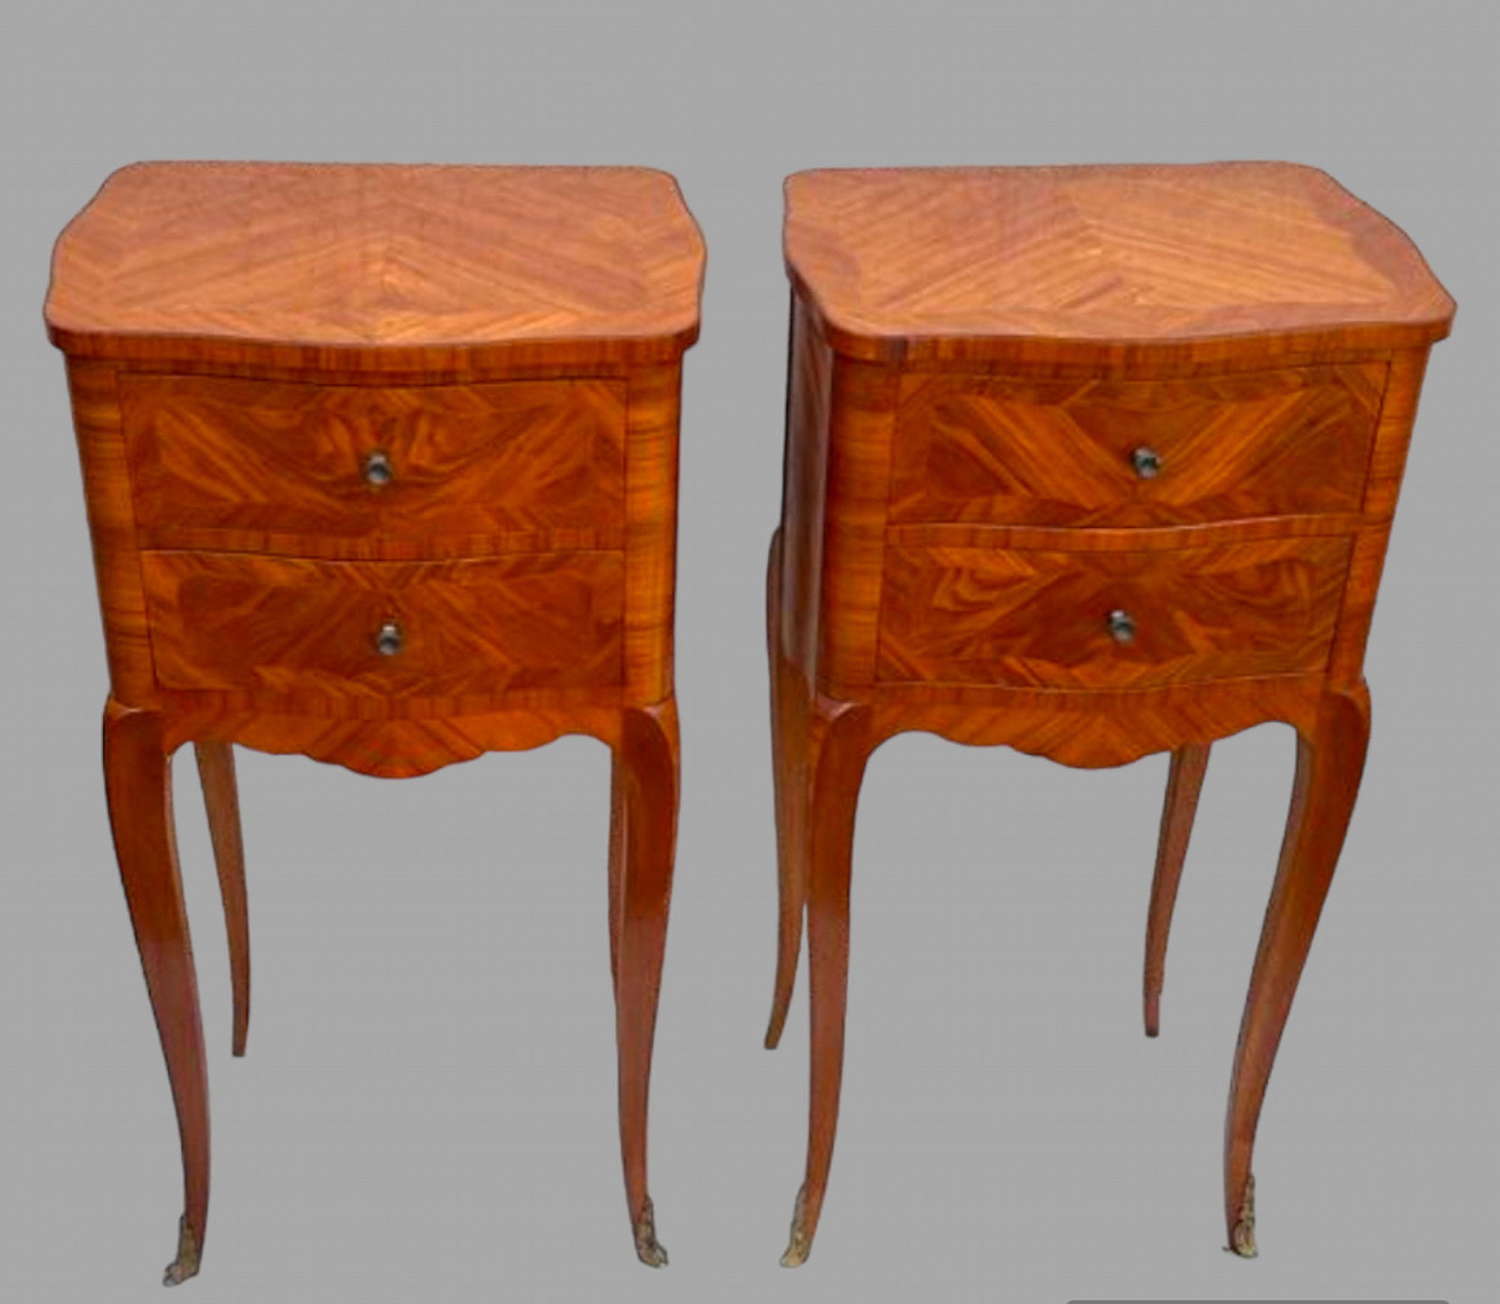 A Pair of Kingwood Bedside Tables